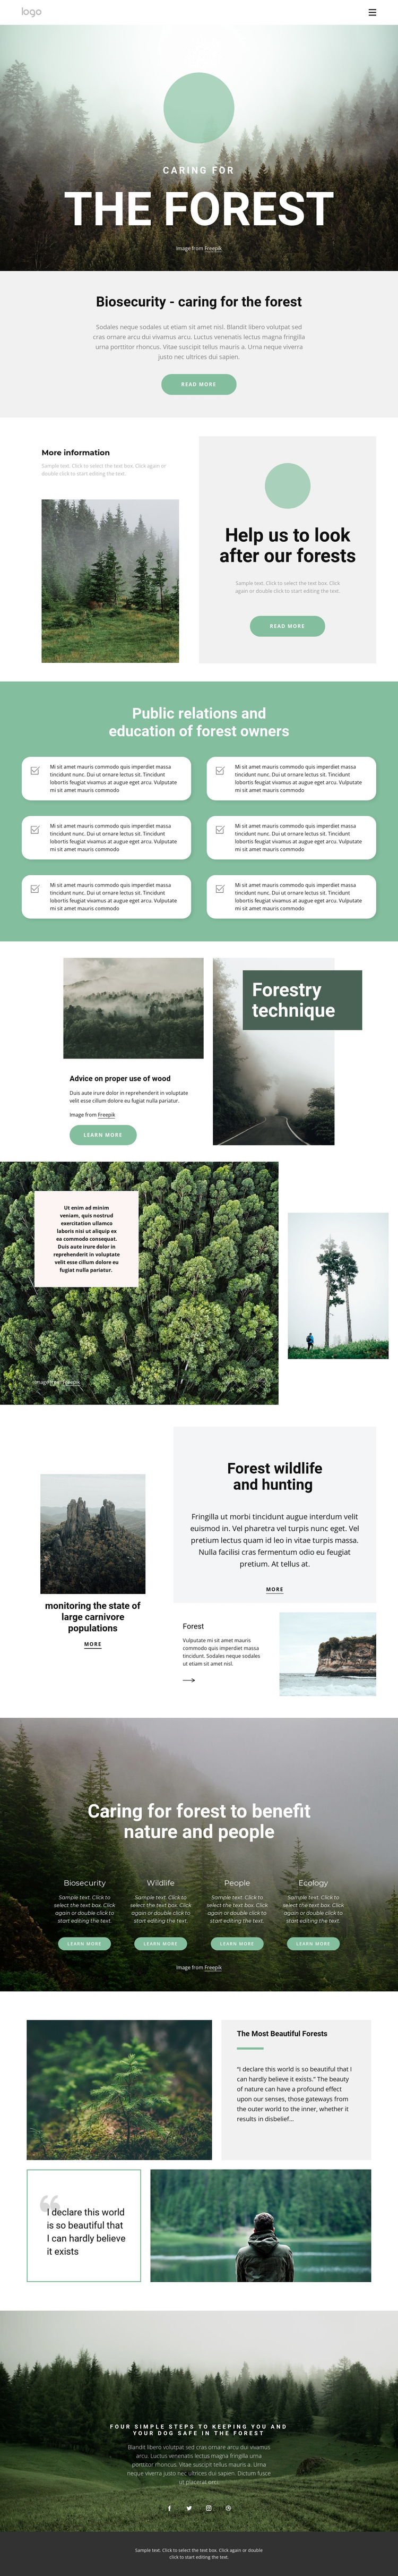 Caring for parks and forests HTML5 Template